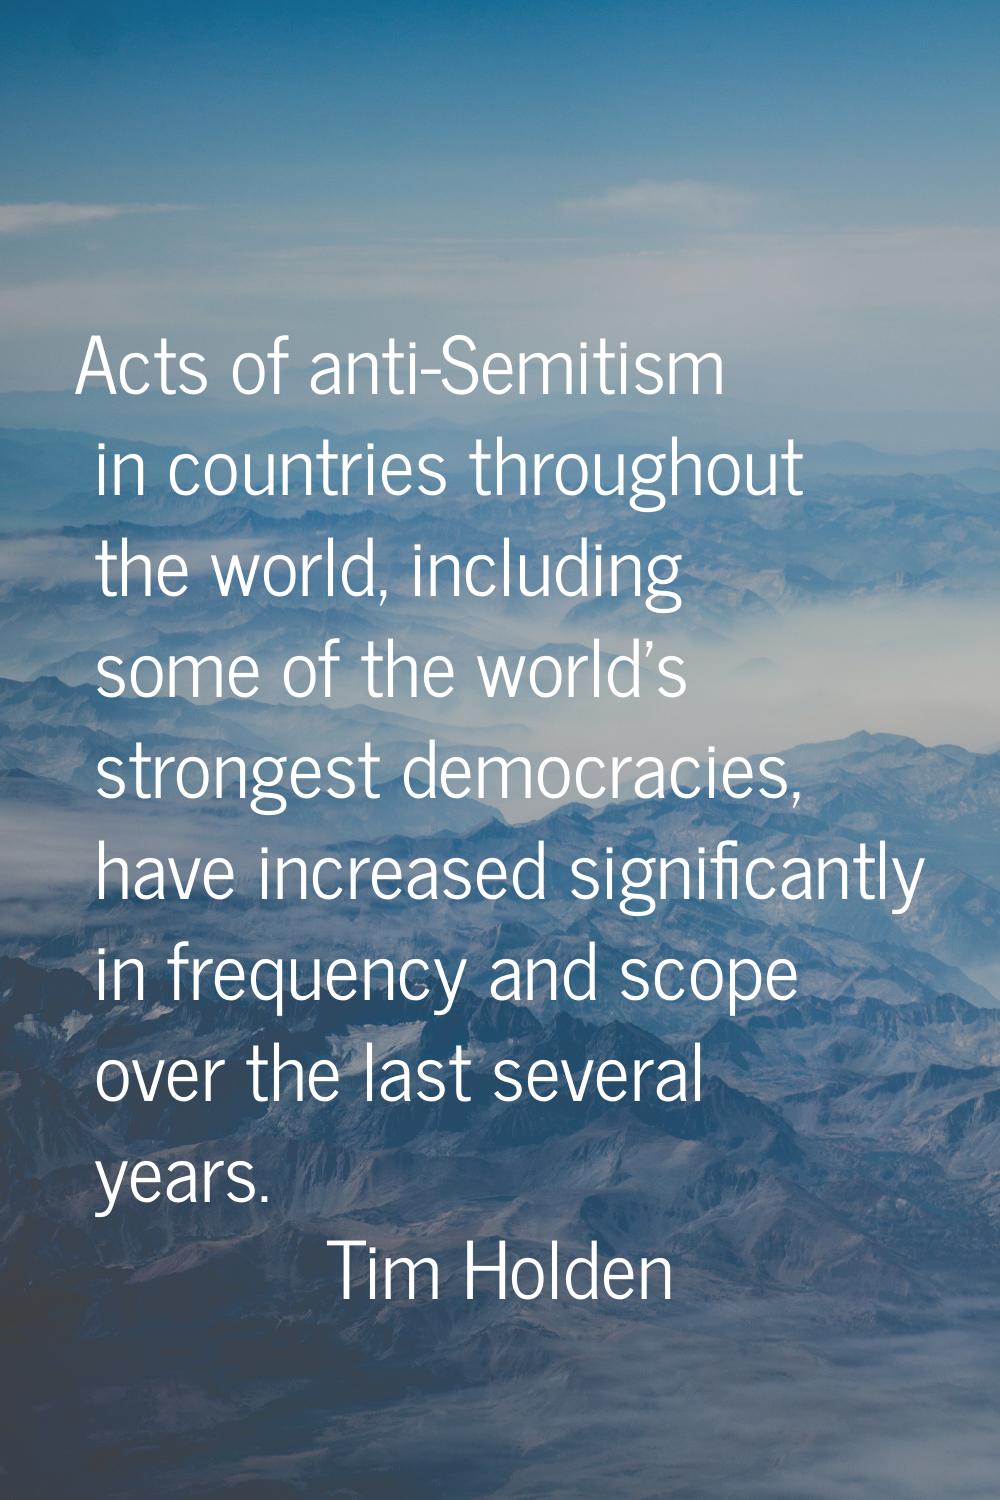 Acts of anti-Semitism in countries throughout the world, including some of the world's strongest de